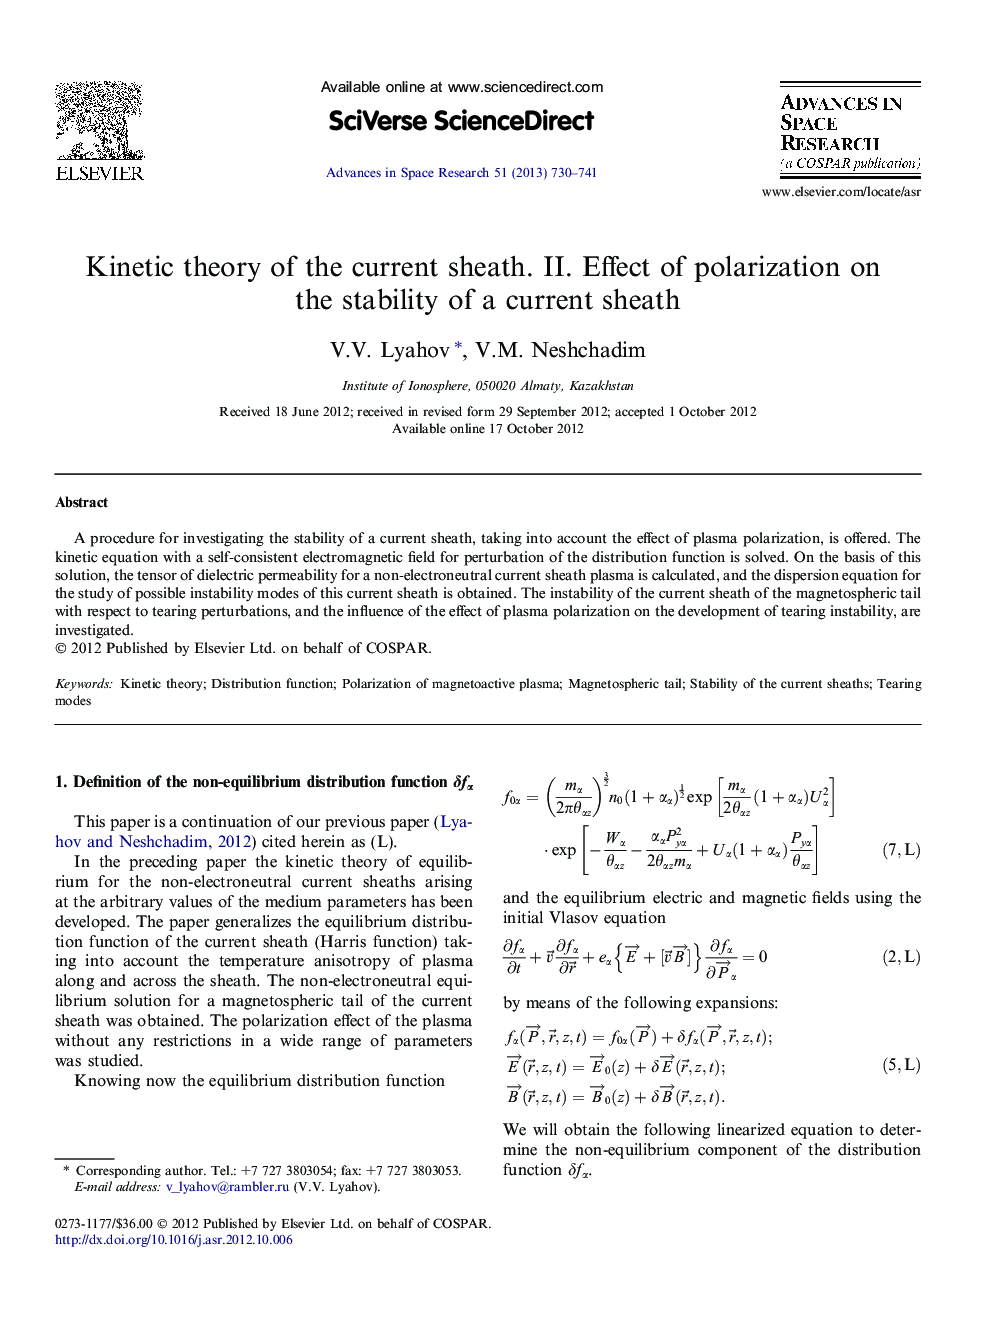 Kinetic theory of the current sheath. II. Effect of polarization on the stability of a current sheath